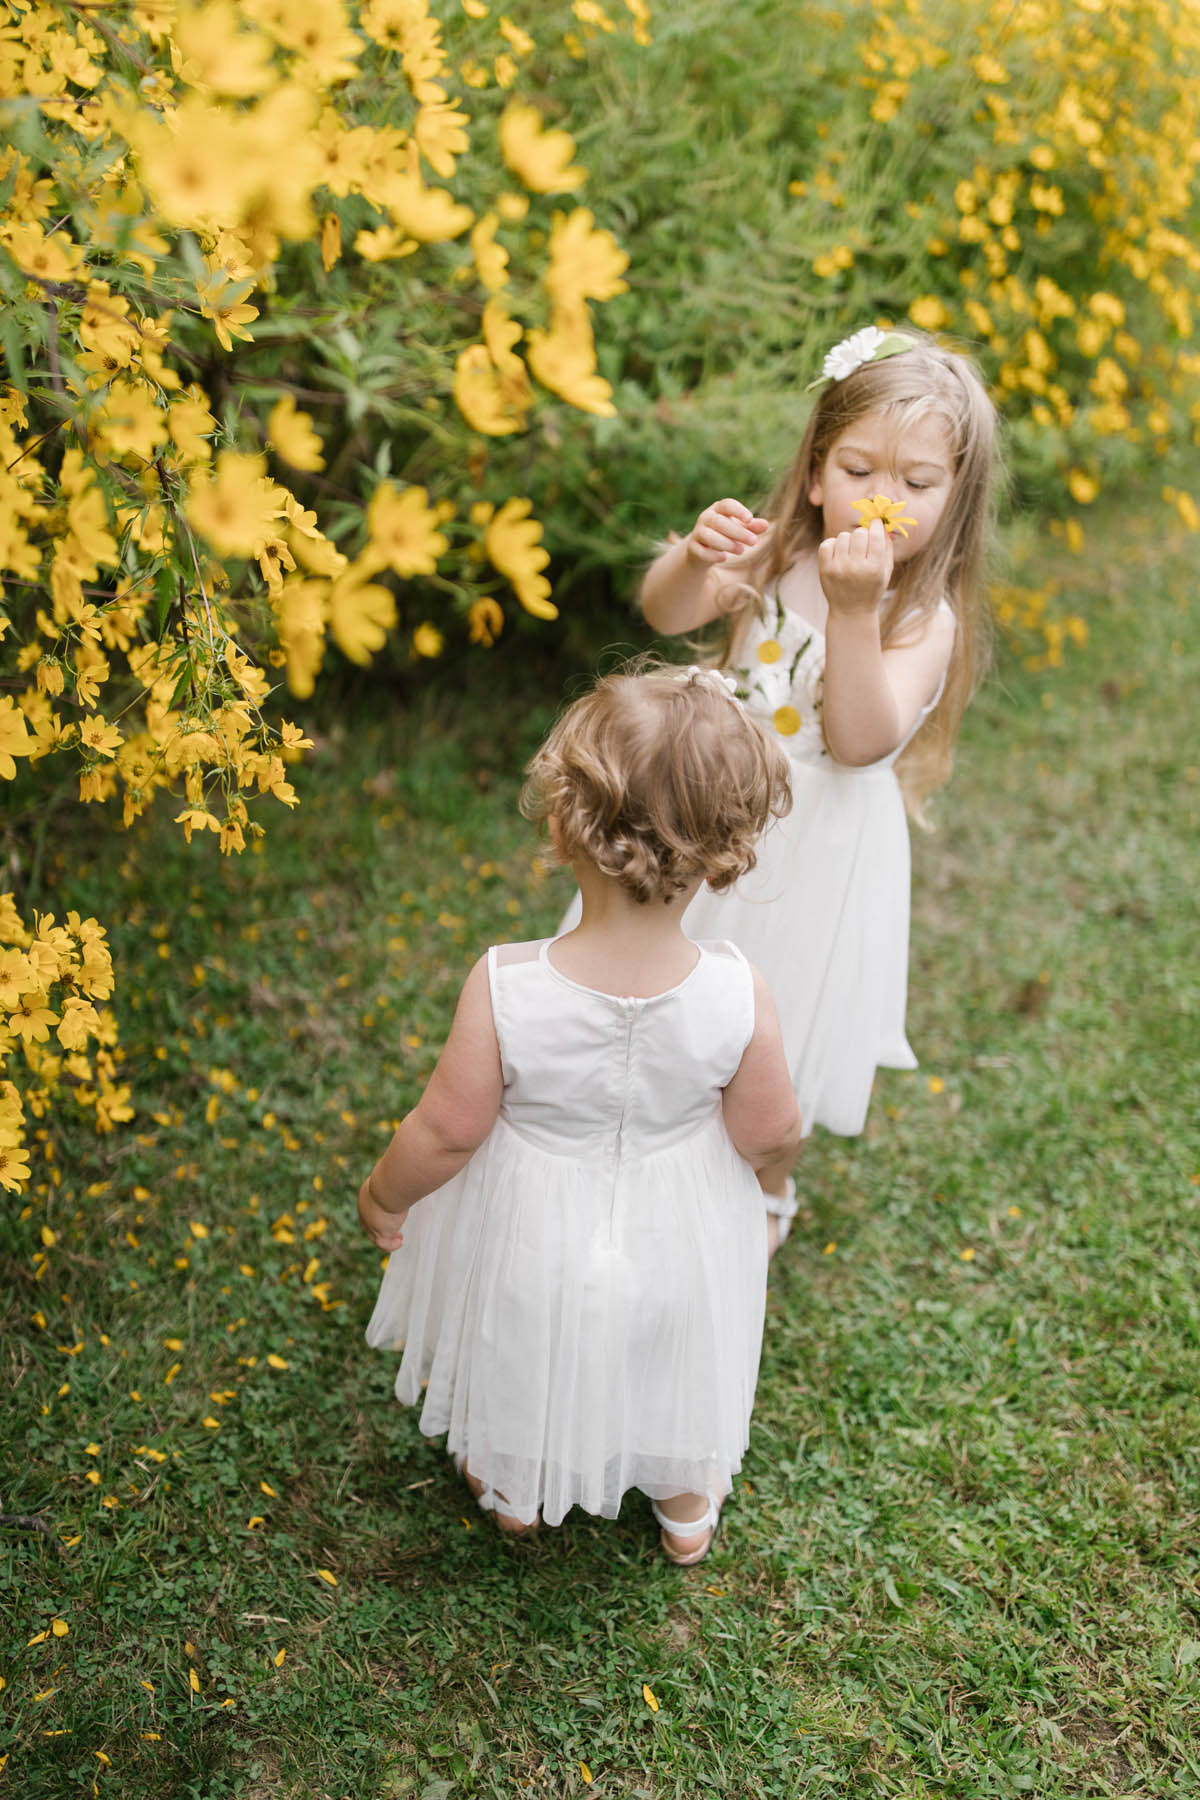 yellow flowers frame this image of little girls 